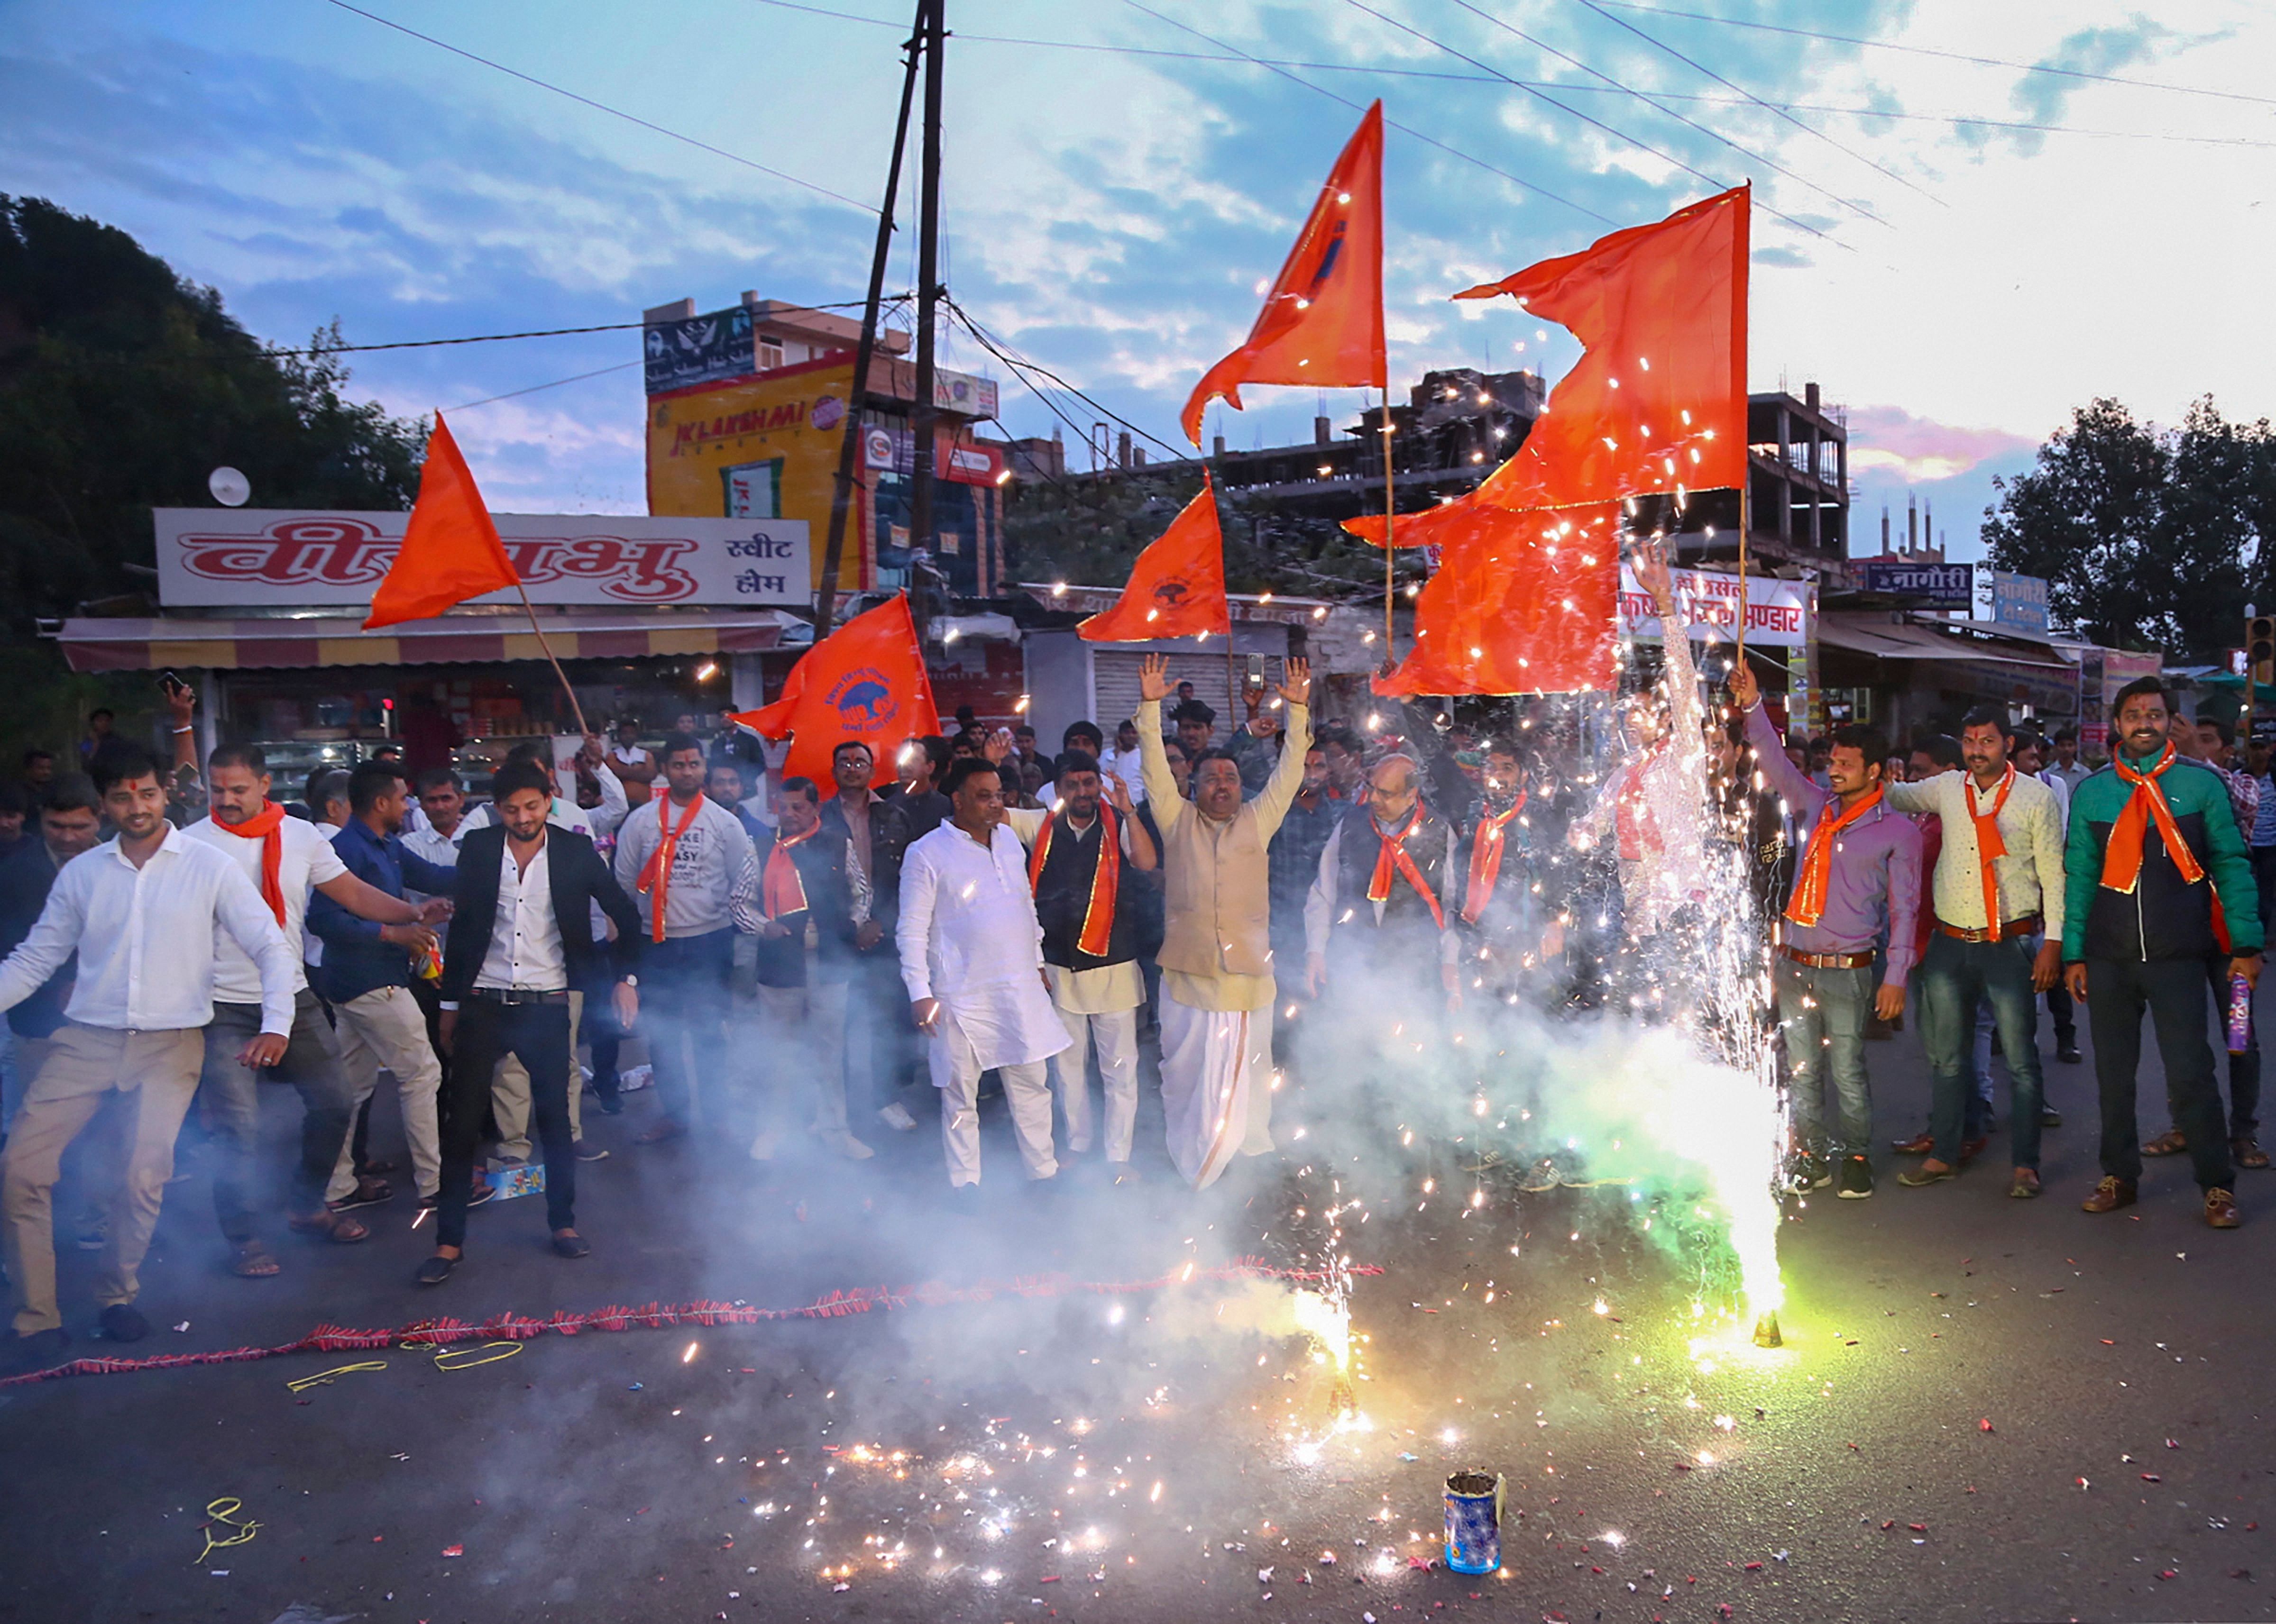 Hindu refugees from Pakistan burst firecrackers with member of Vishwa Hindu Parishad (VHP) as they celebrate the approval of the government's Citizenship Amendment Bill. (PTI Photo)